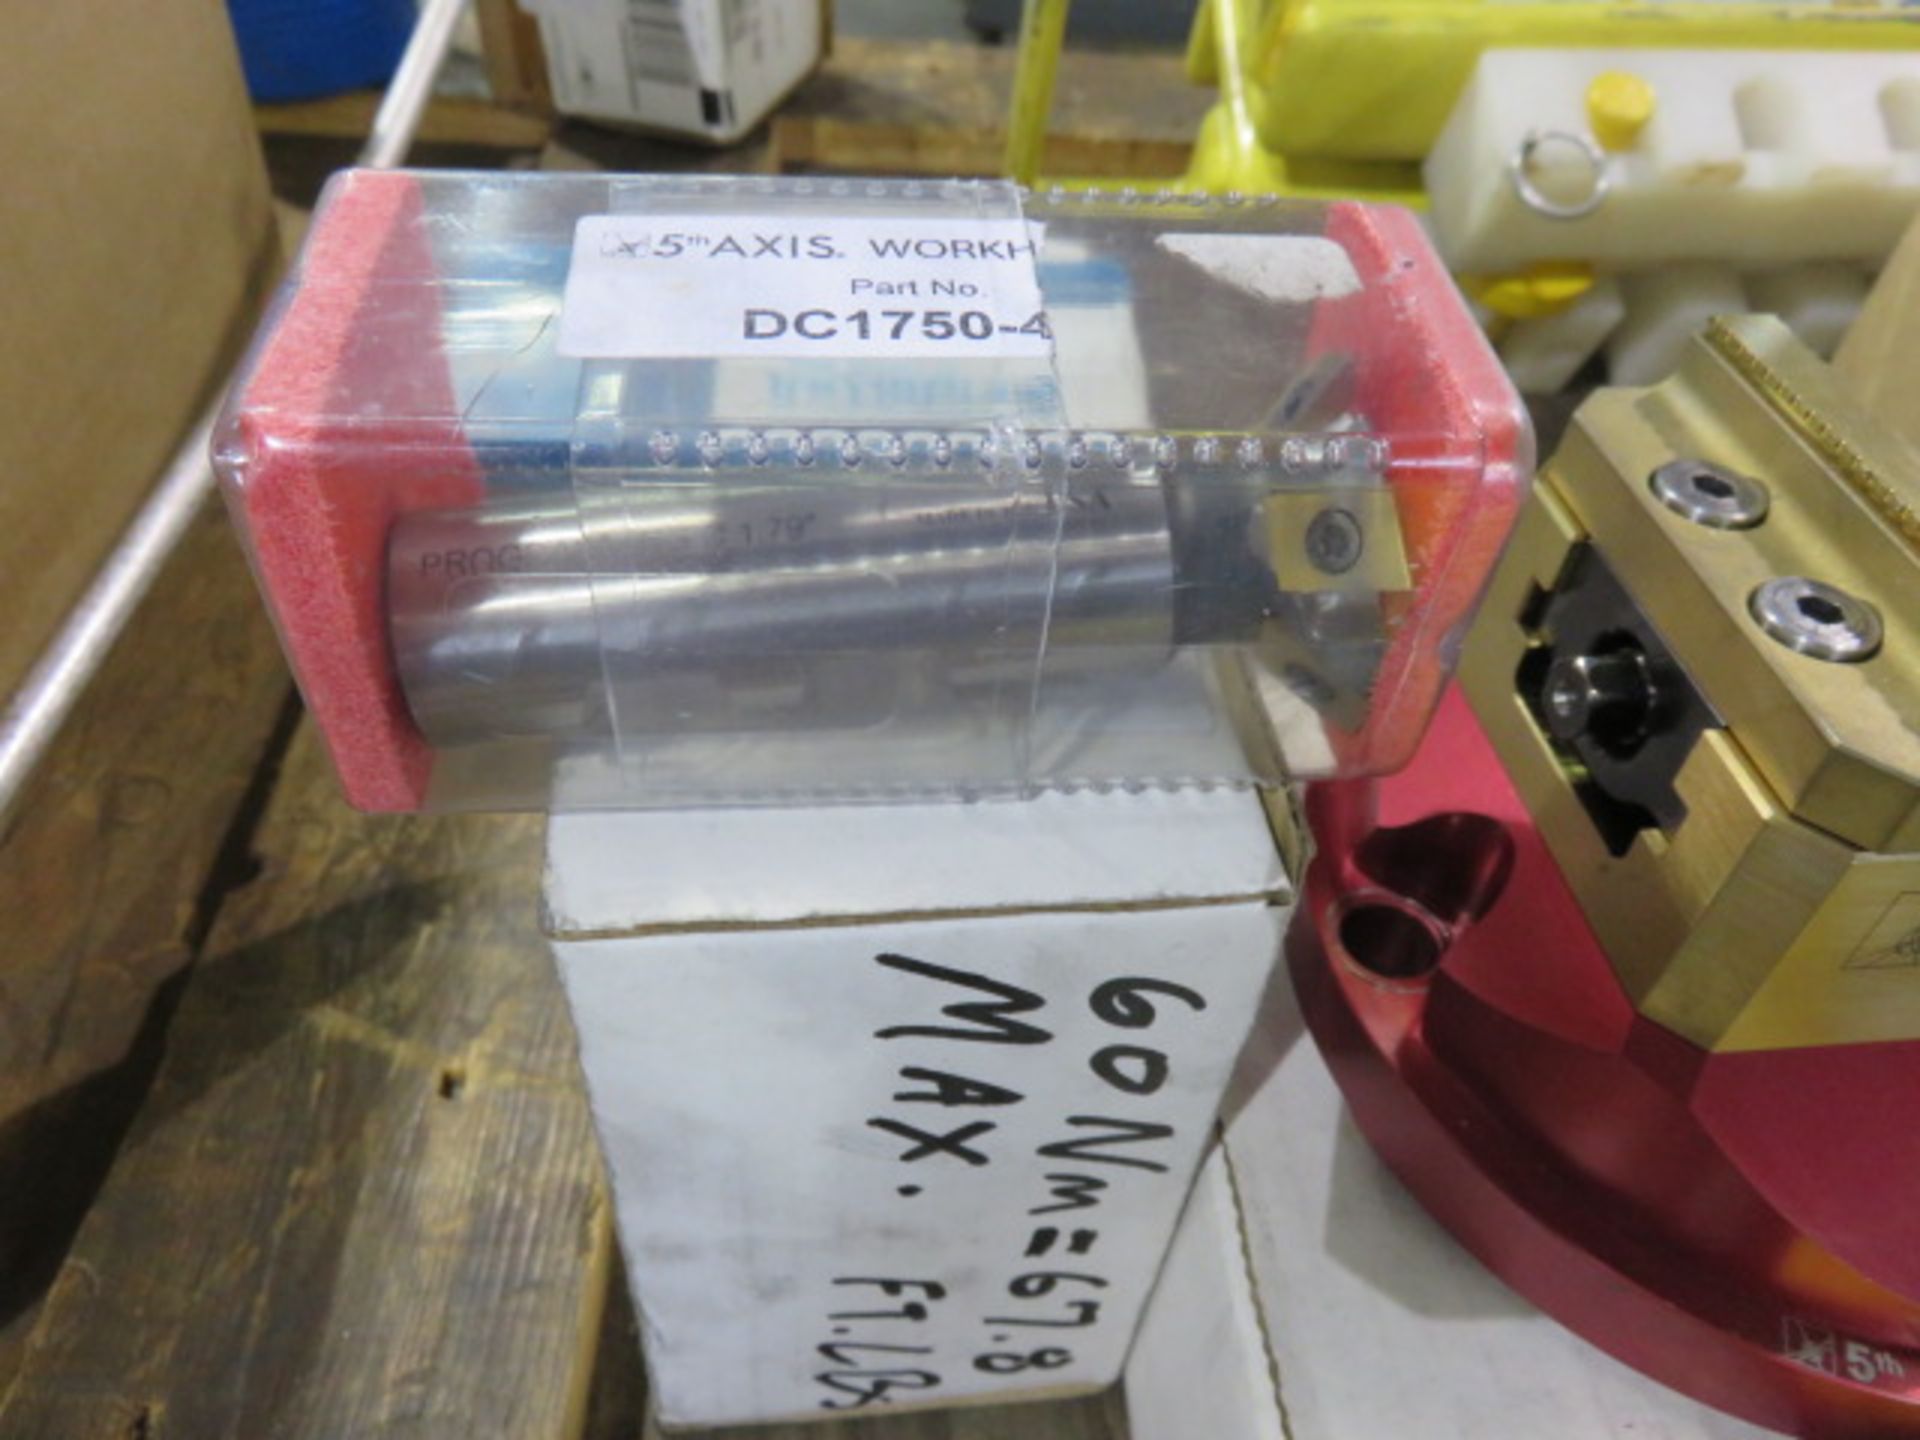 FIFTH AXIS VPY75 WORKHOLDING FIXTURE W/ DC1750-4 DOVETAIL CUTTER - Image 3 of 3